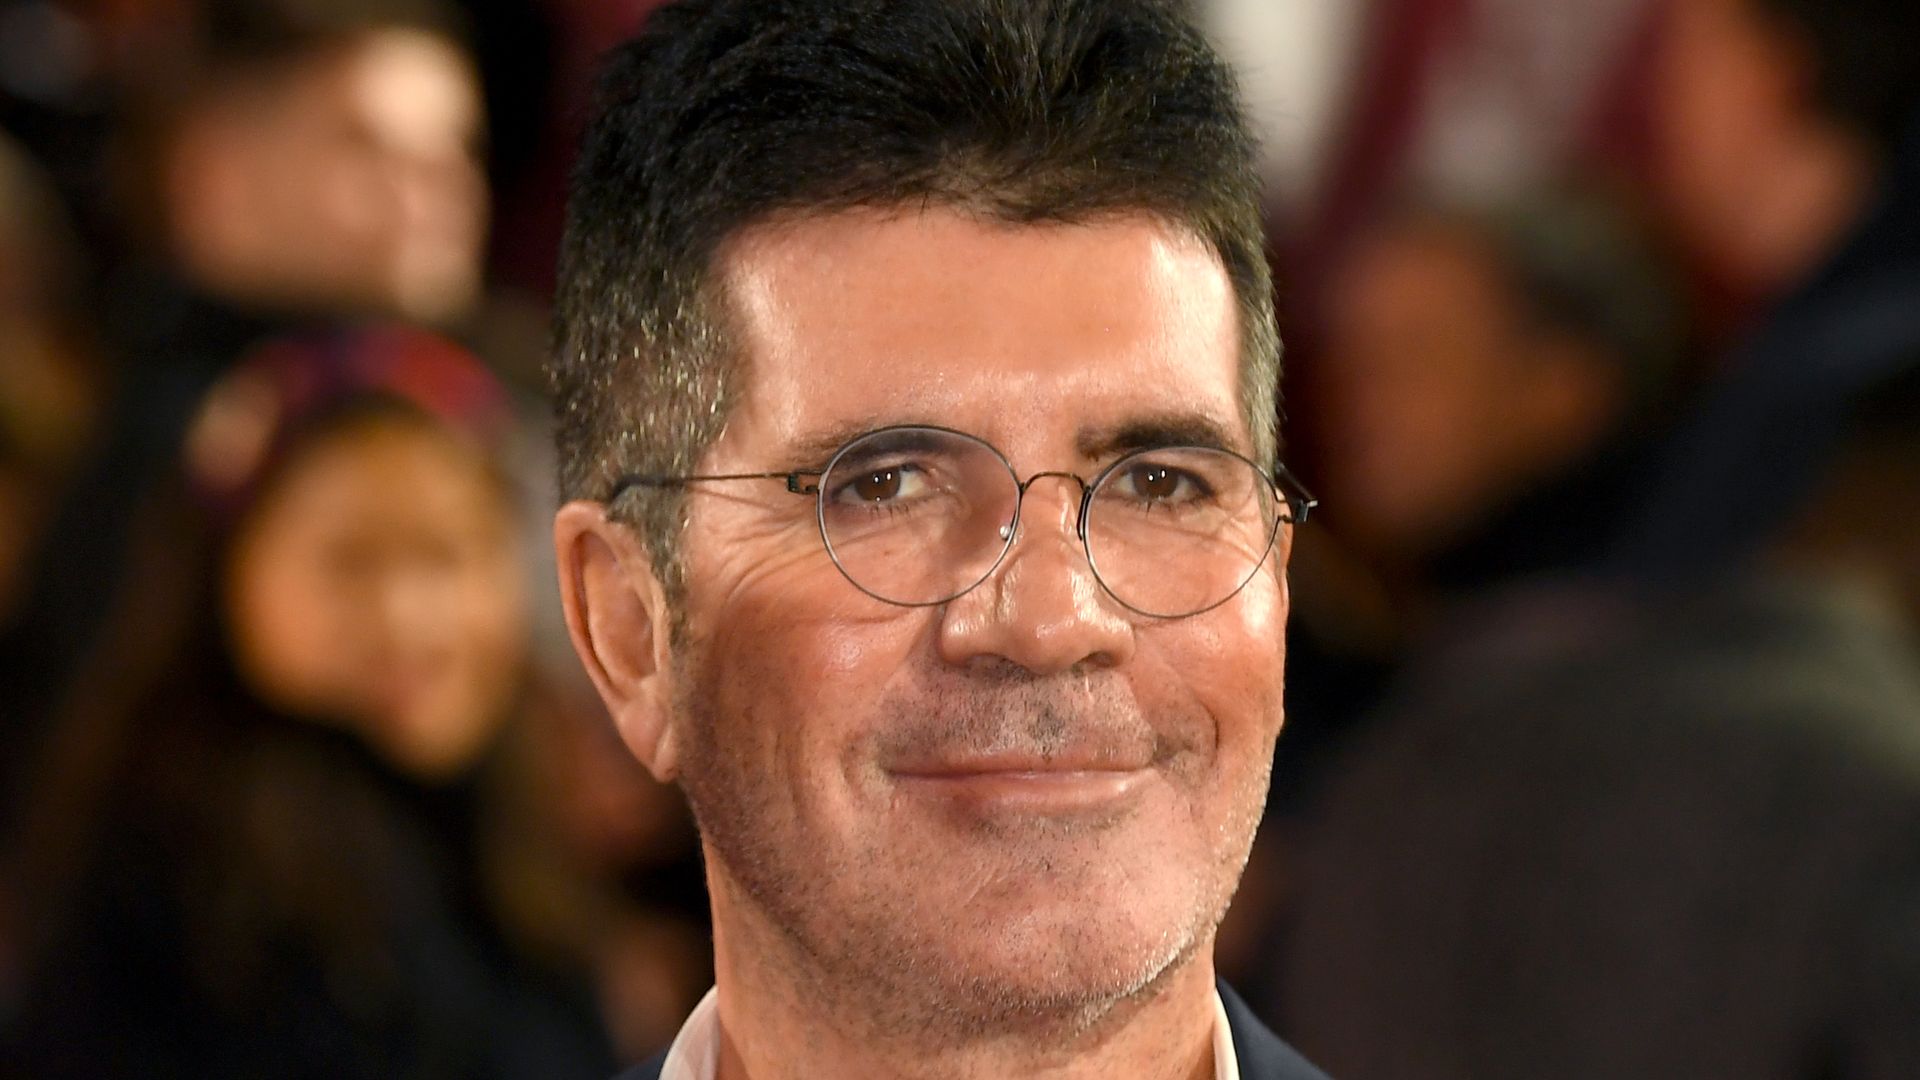 Simon Cowell in a suit and an open shirt with glasses